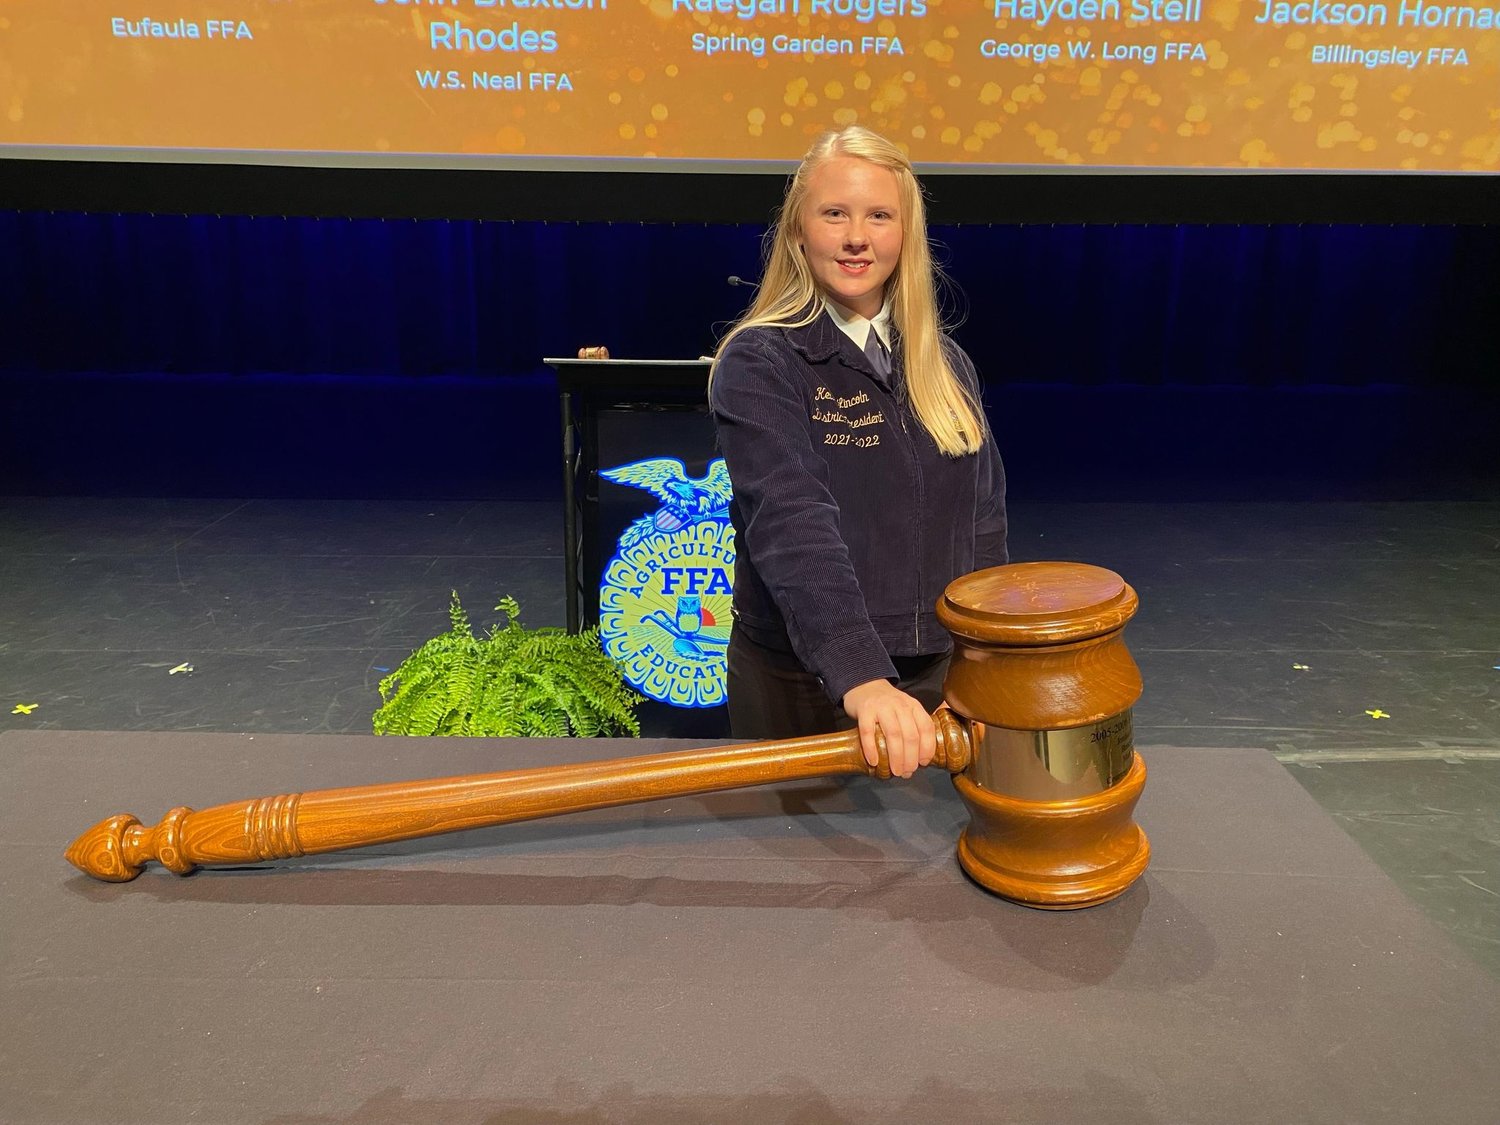 Kellen Lincoln, rising senior at Baldwin County High School, will spend the school year serving as the president of the Alabama State FFA. She was elected to the role at the recent state convention.